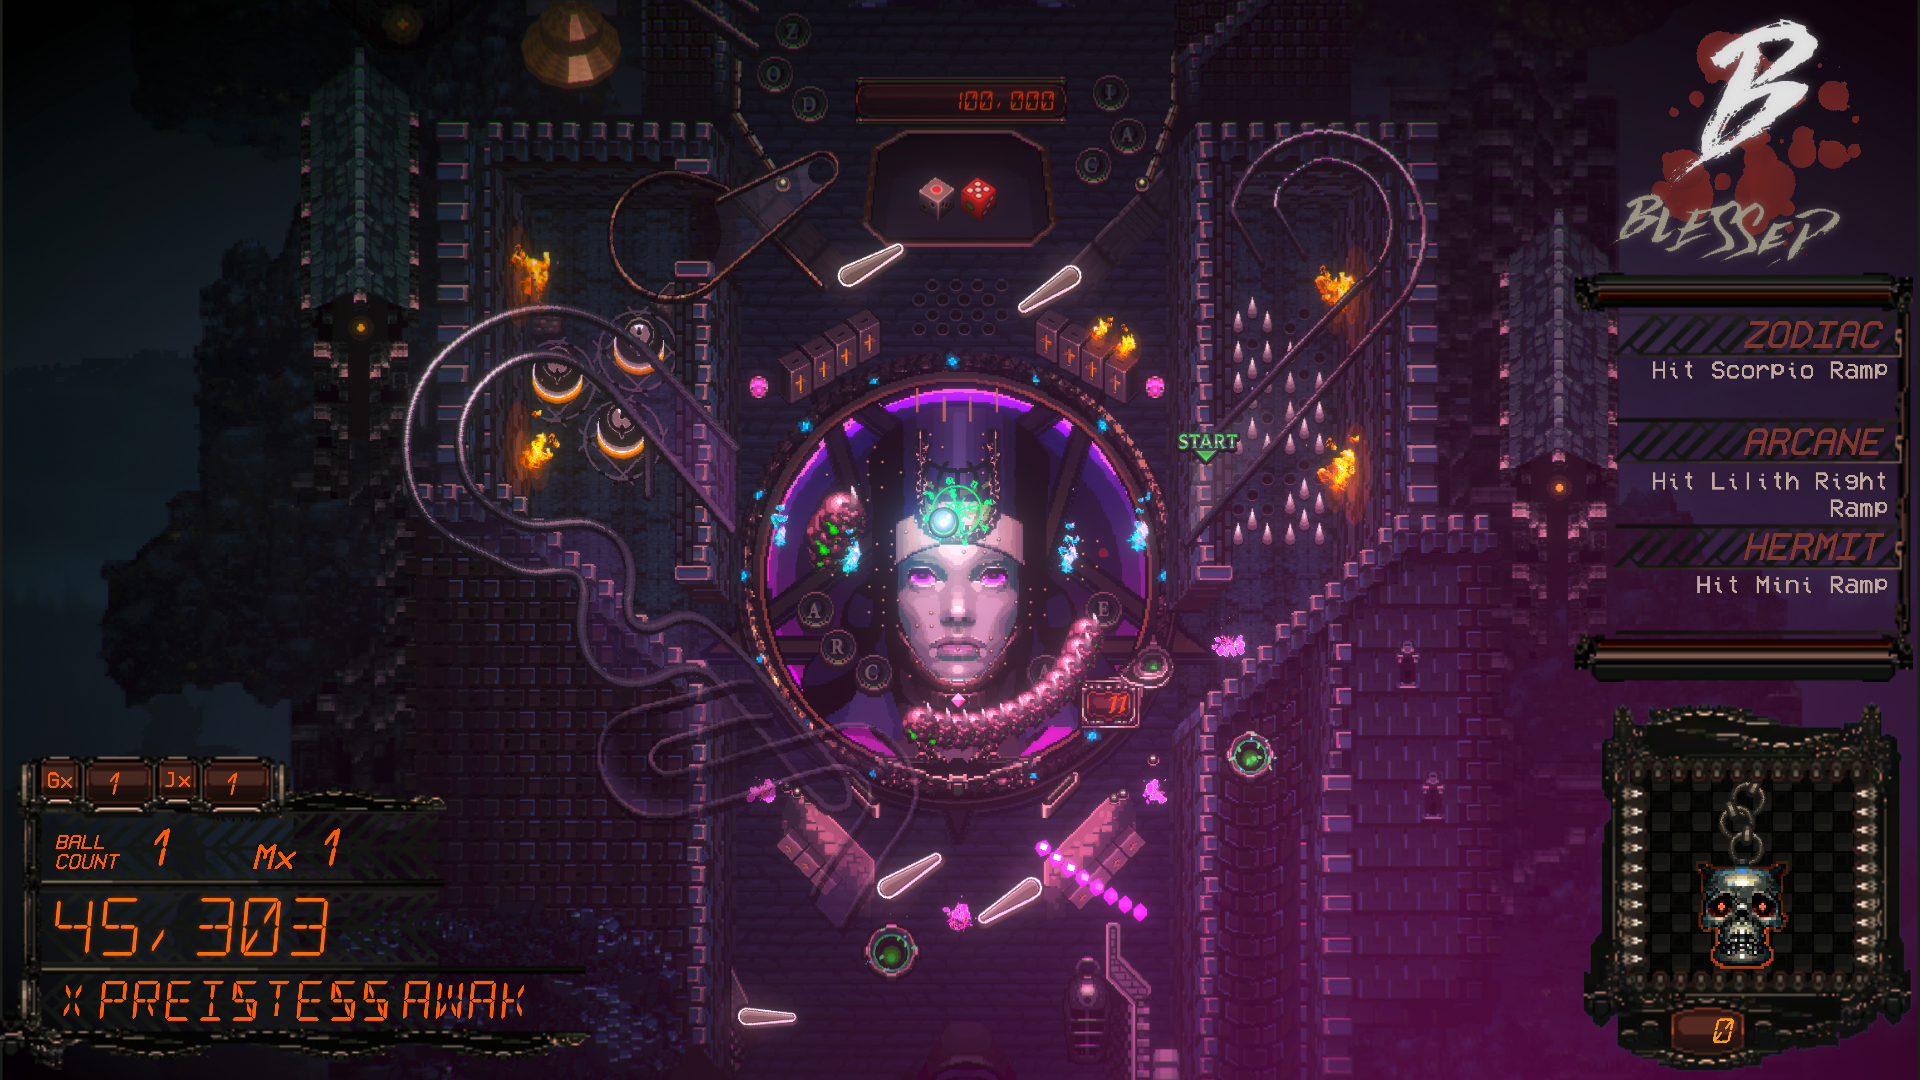 Epic's next free game is occult pinball with shmup and hack-and-slash